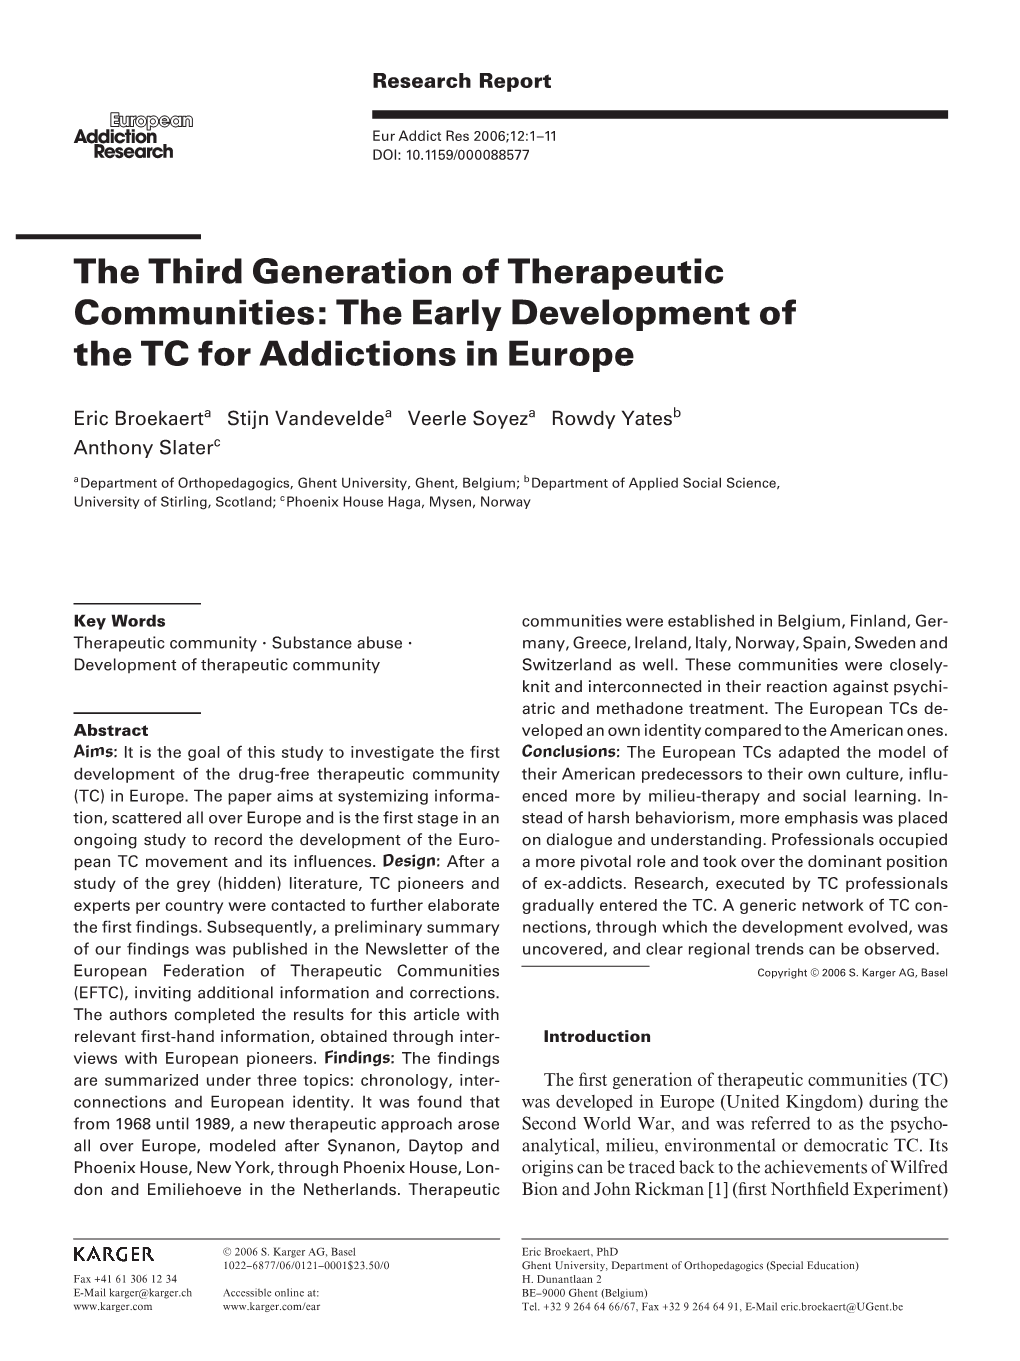 The Third Generation of Therapeutic Communities: the Early Development of the TC for Addictions in Europe